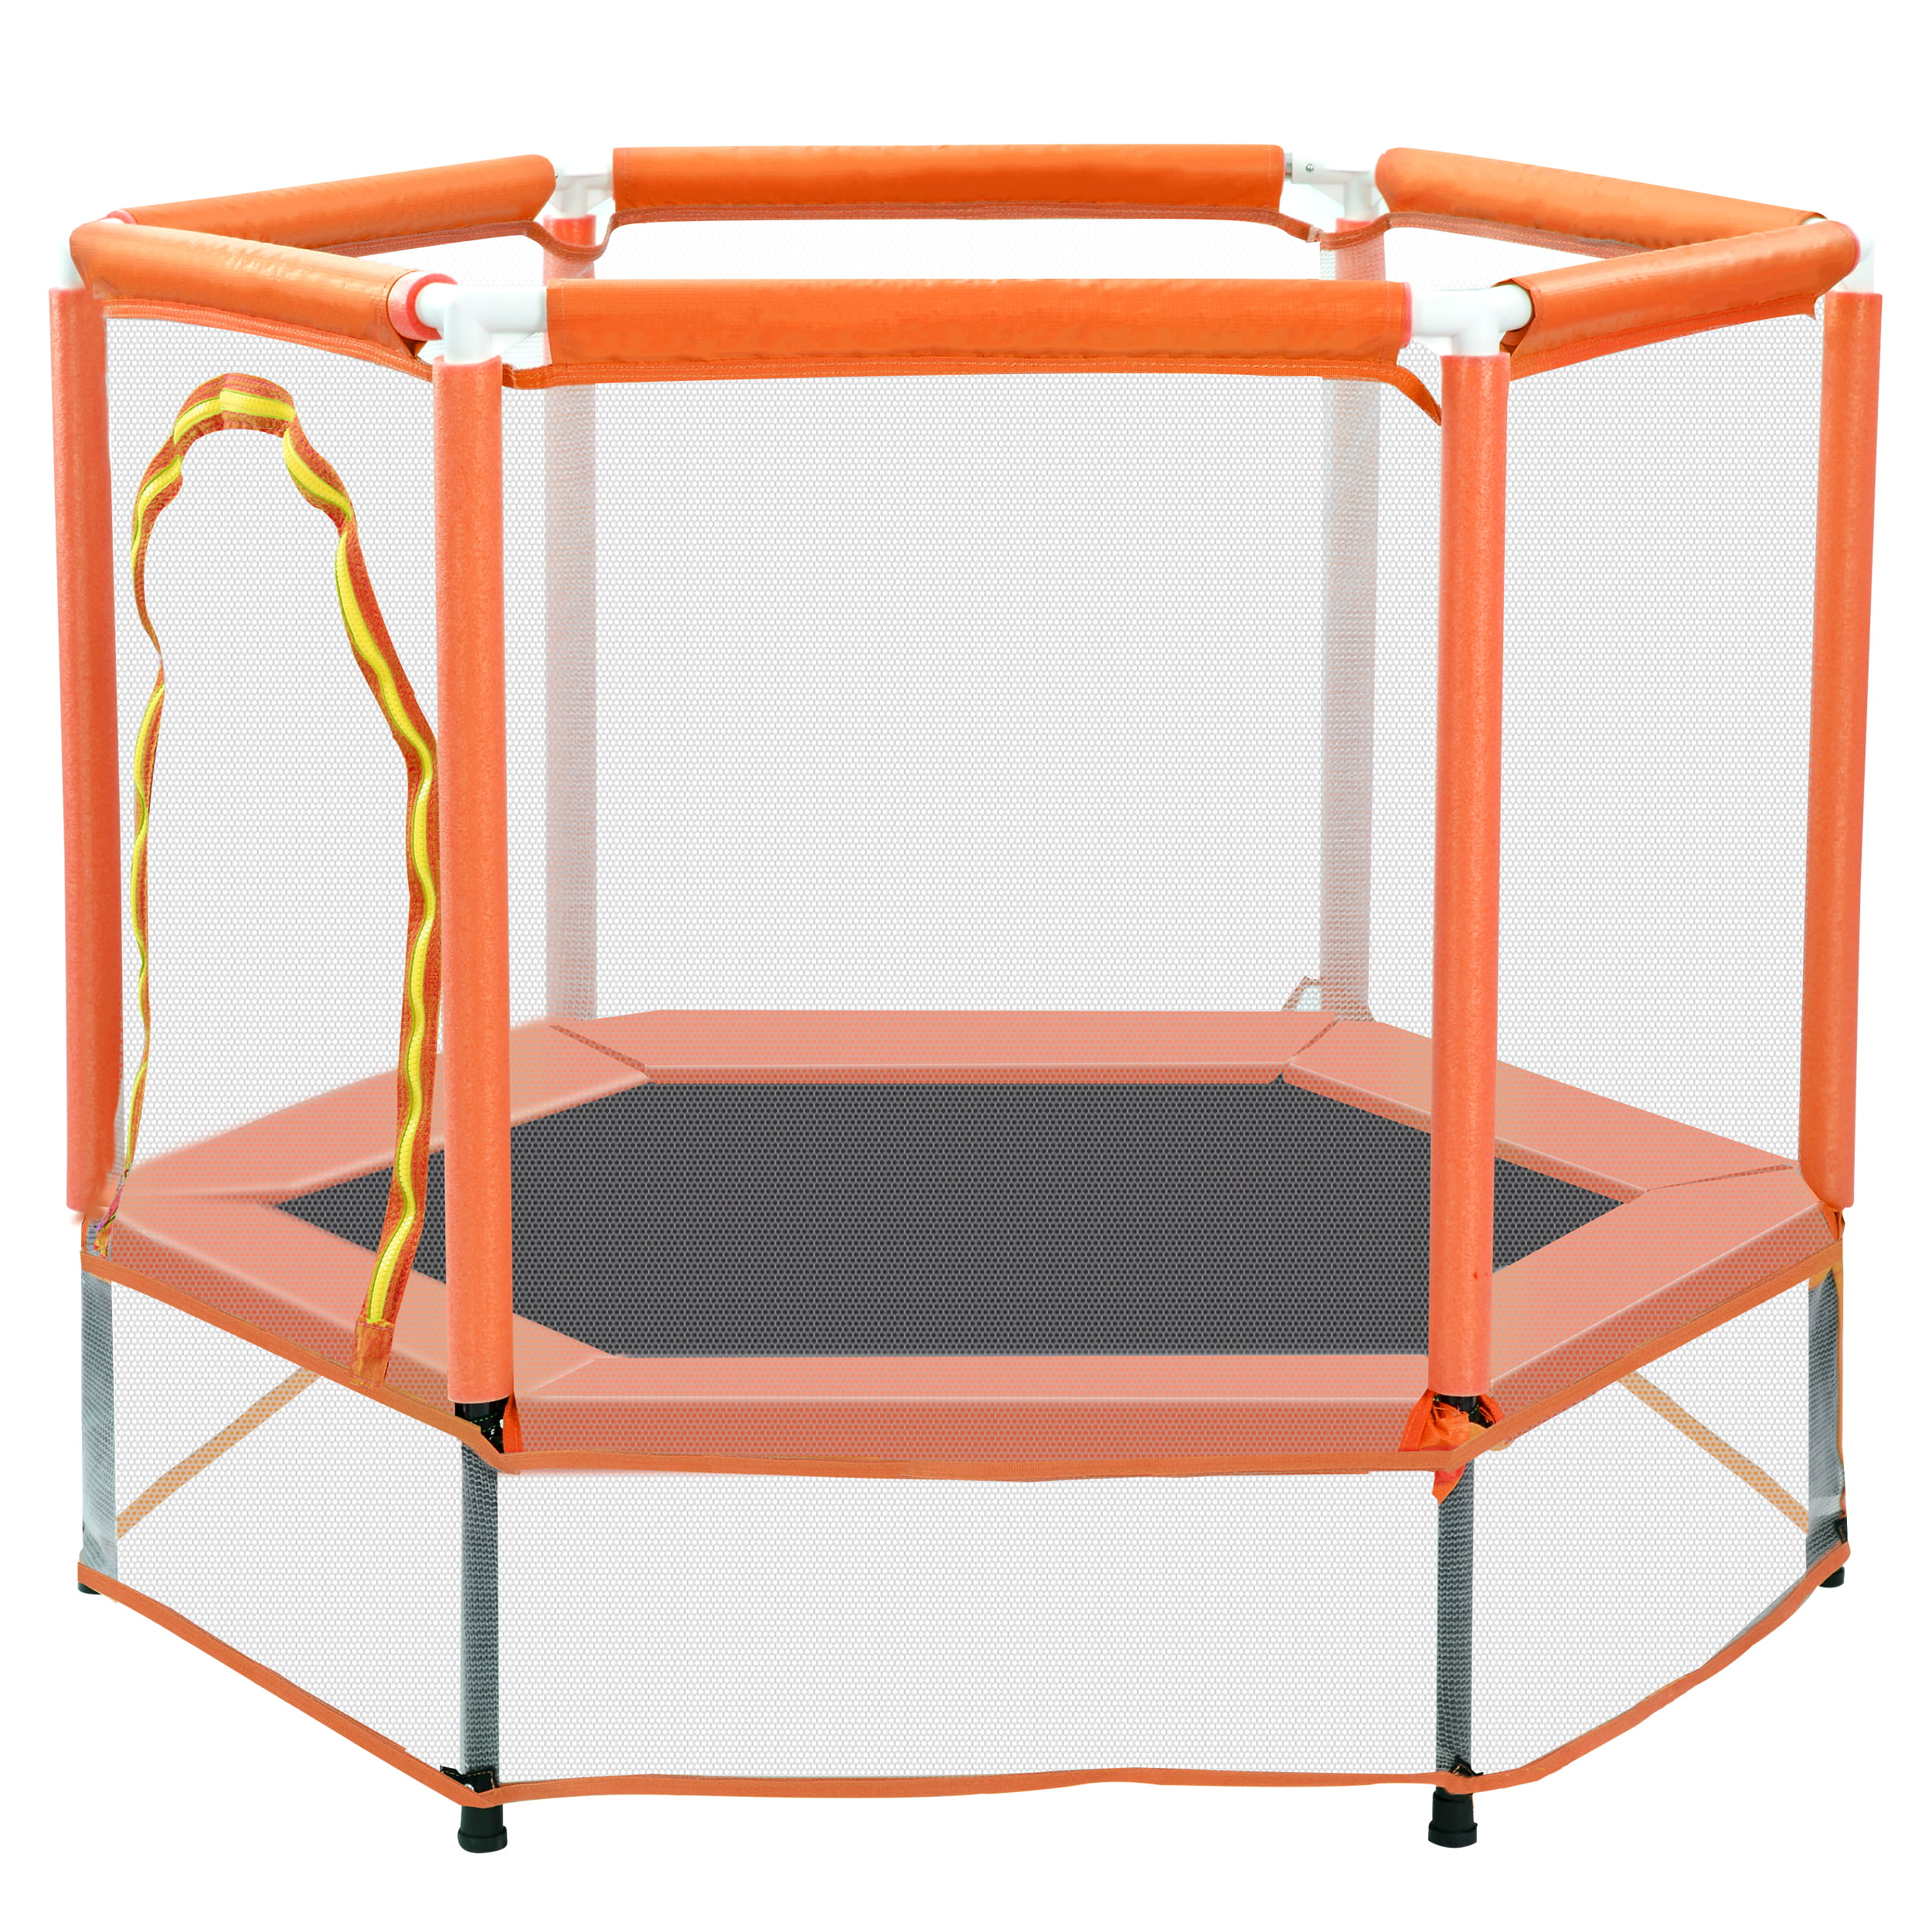 Details about   4.5FT Out/Indoor Jumping Youth Kids Toy Trampoline Exercise Safety Pad Enclosure 